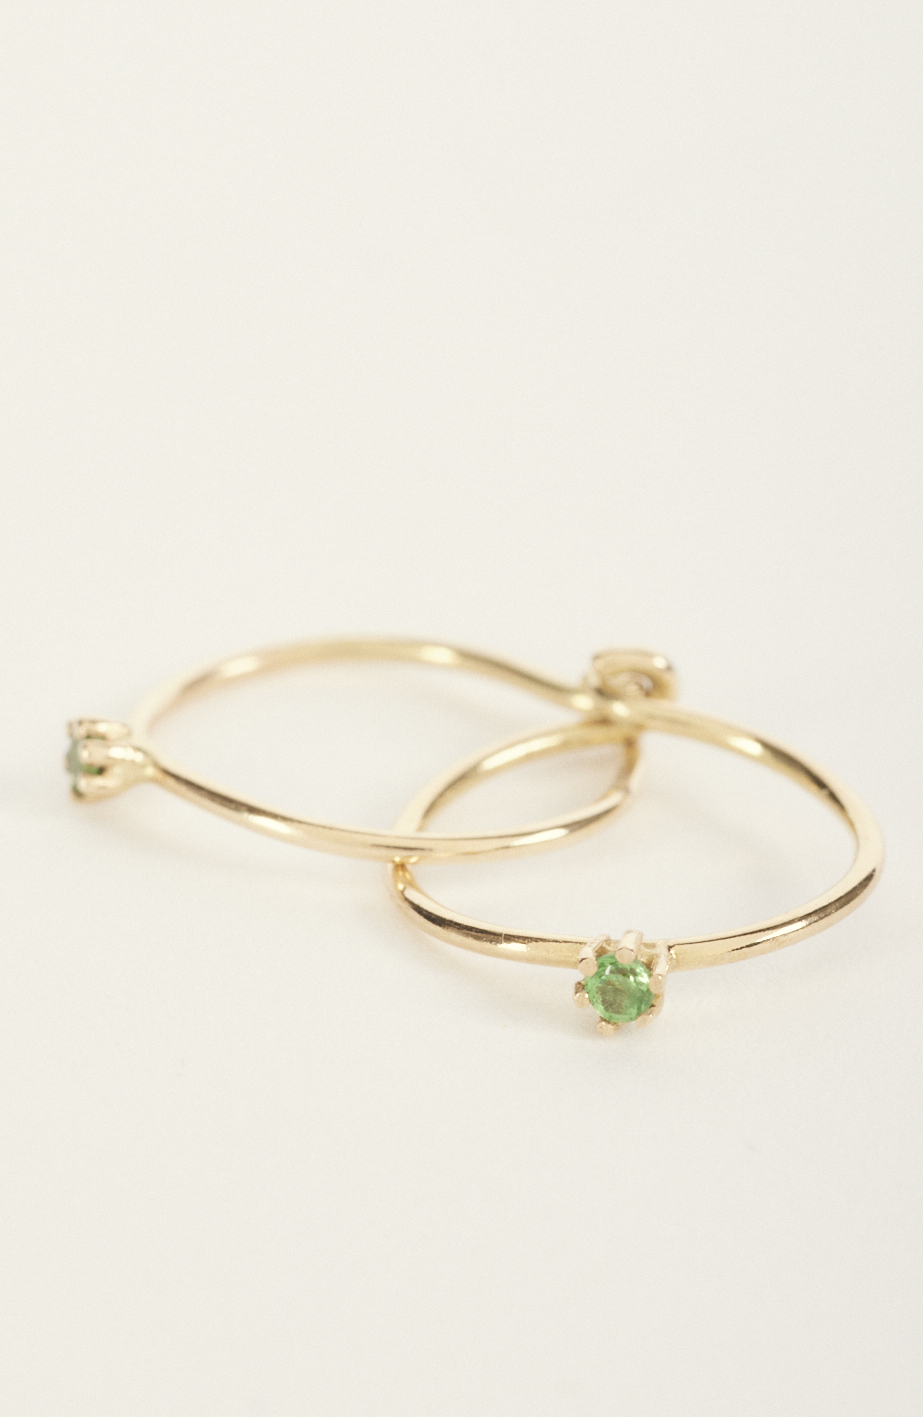 Earrings "Wire Solitaire" in gold with green tsavorite